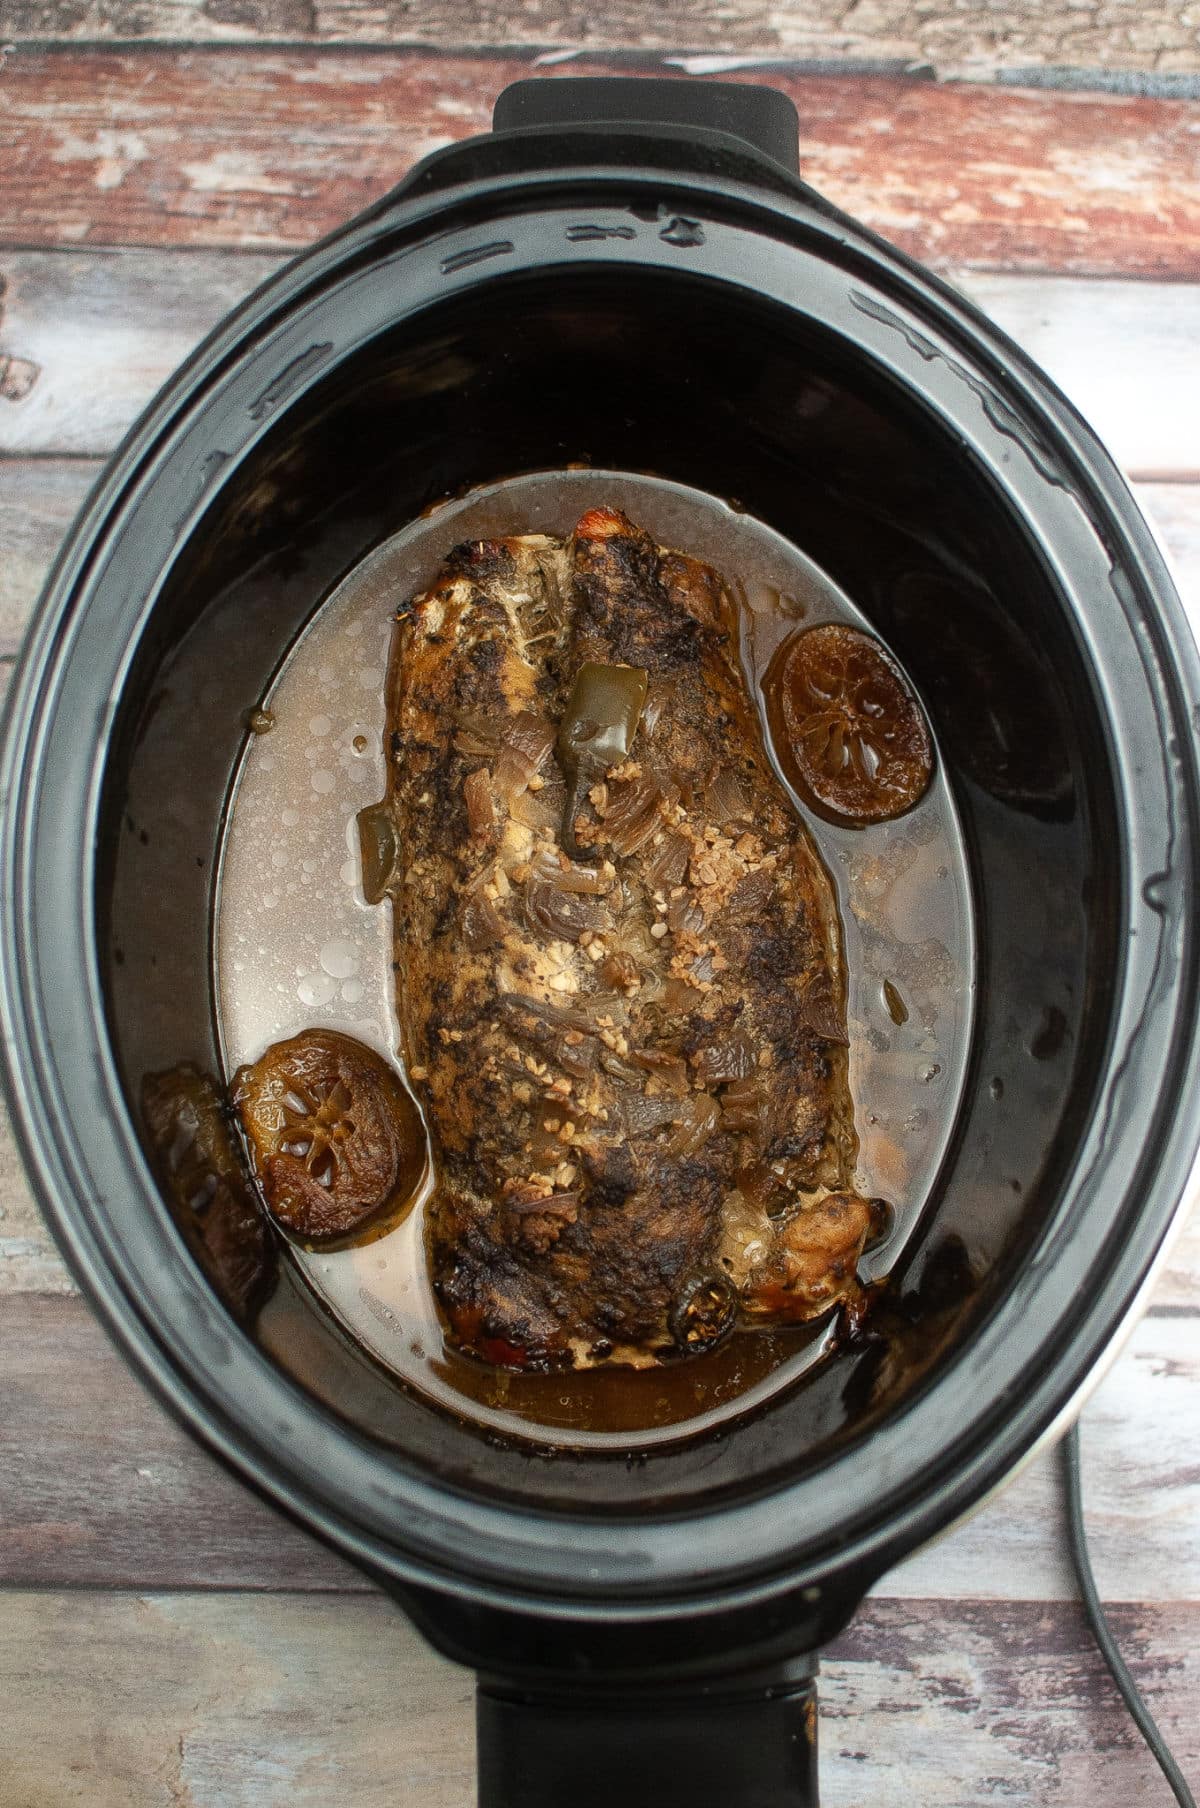 Cooked pork tenderloin with spices and limes in juices in slow cooker.